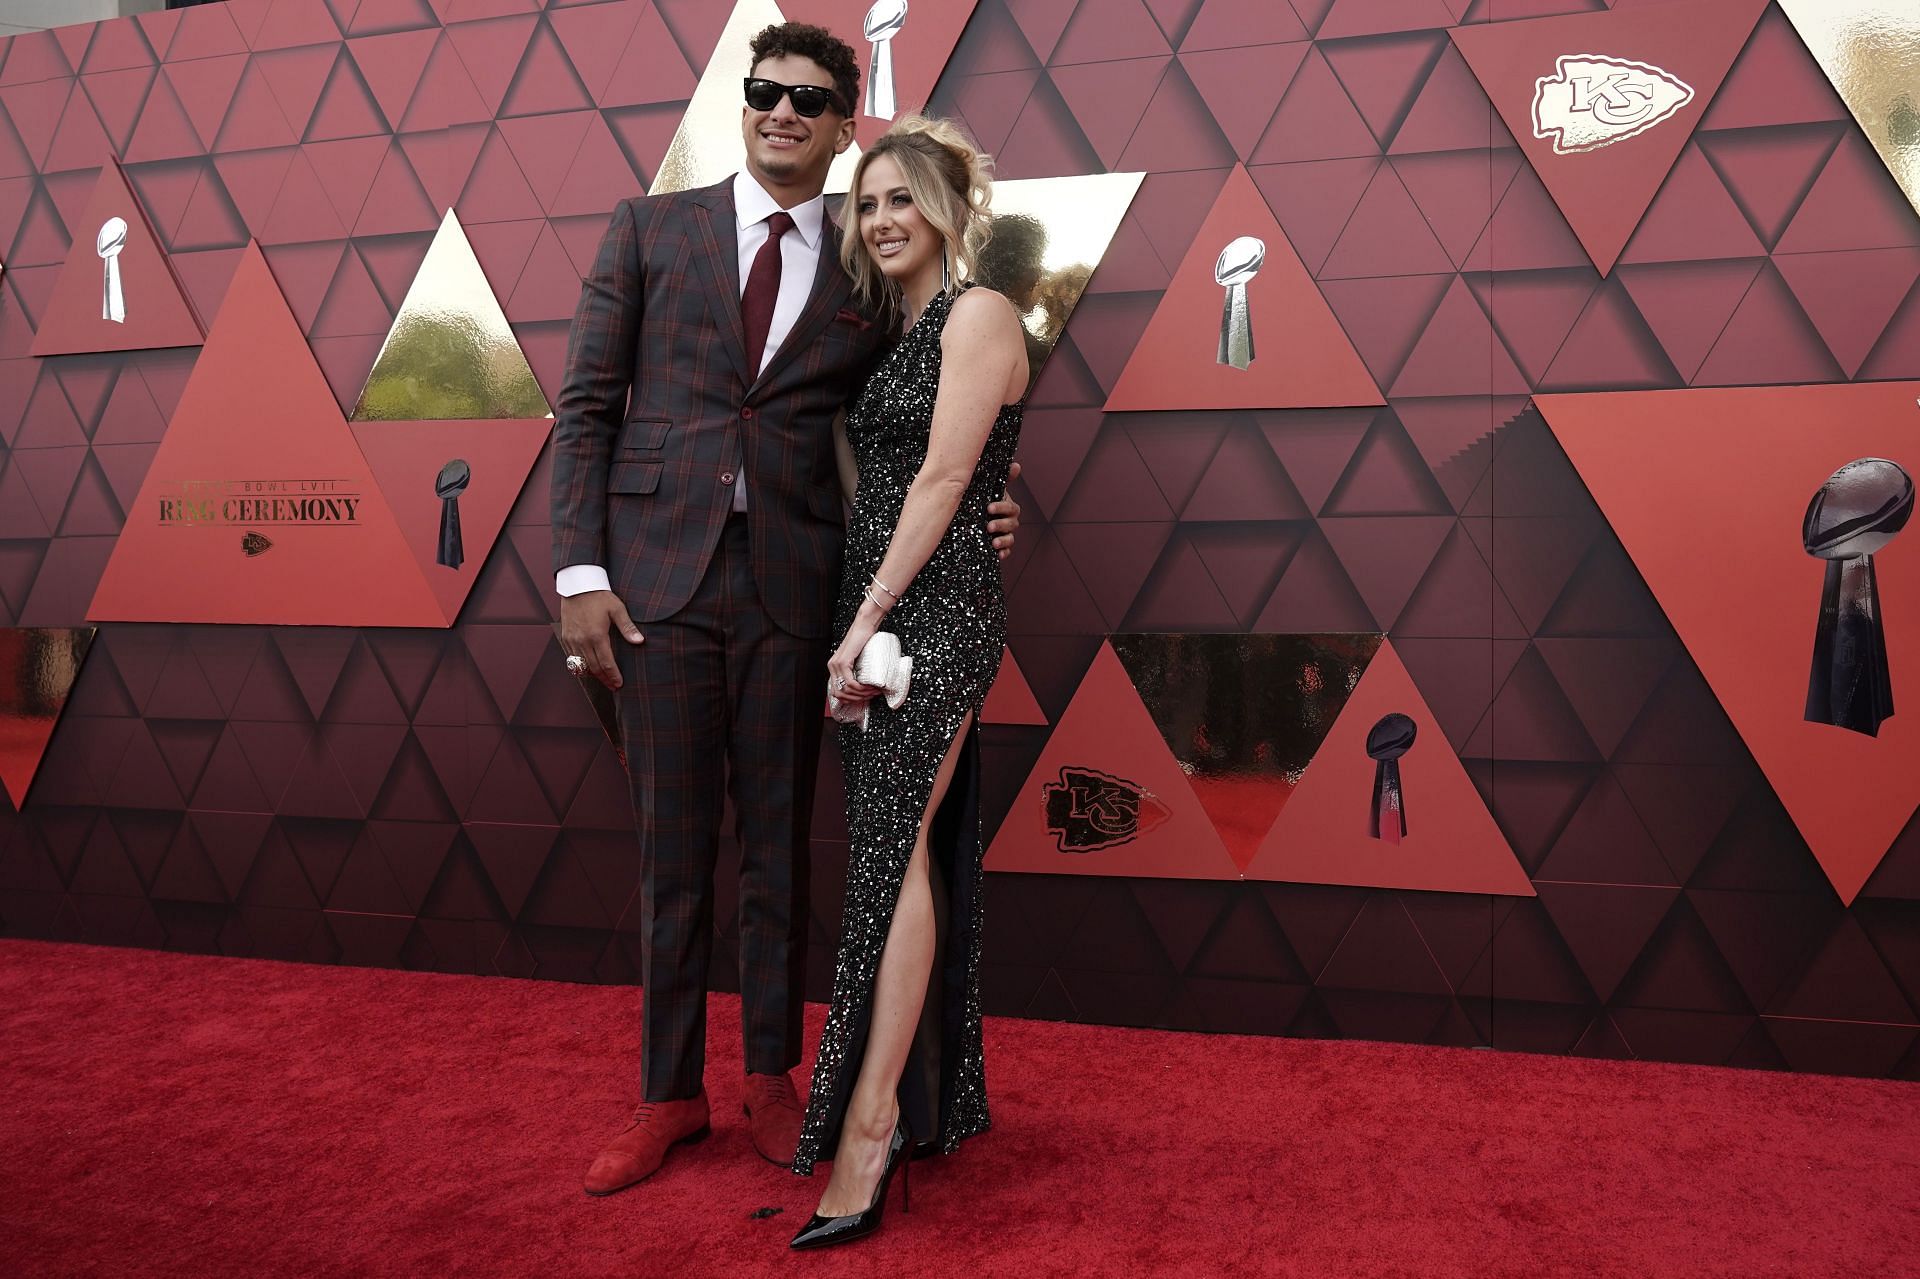 Patrick Mahomes and his wife Brittany.